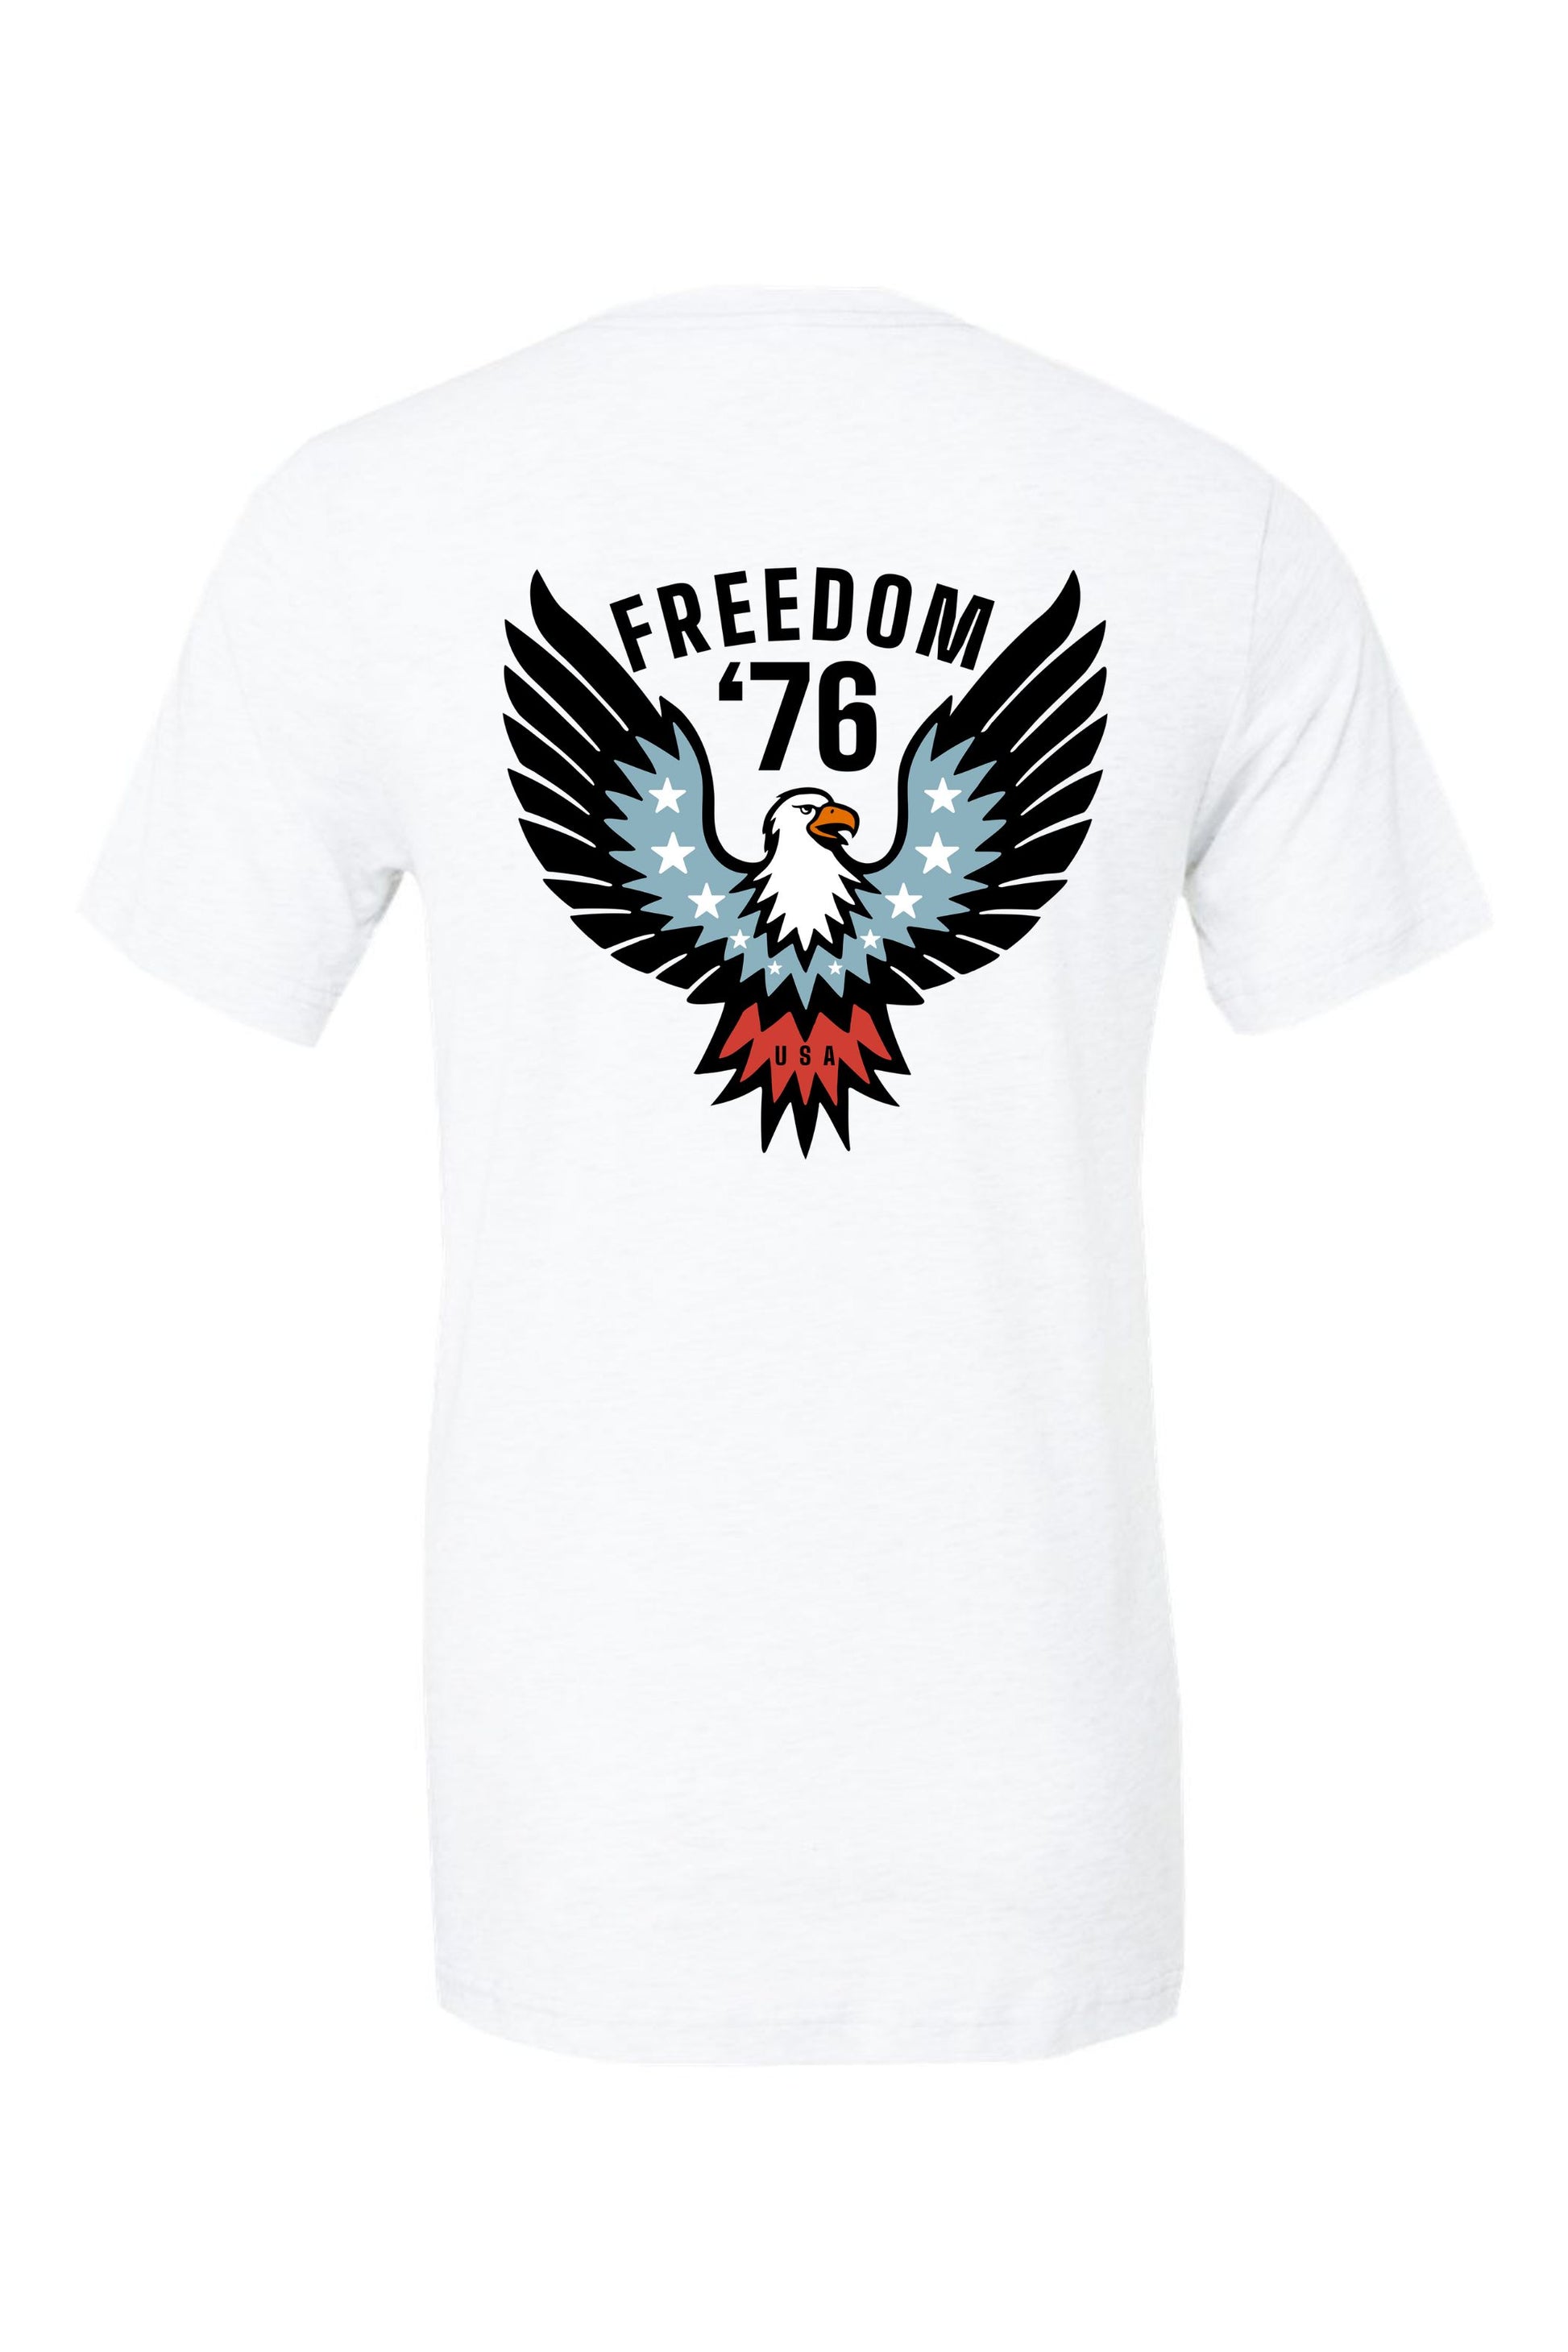 Freedom Eagle | Adult Tee | RTS-Sister Shirts-Sister Shirts, Cute & Custom Tees for Mama & Littles in Trussville, Alabama.